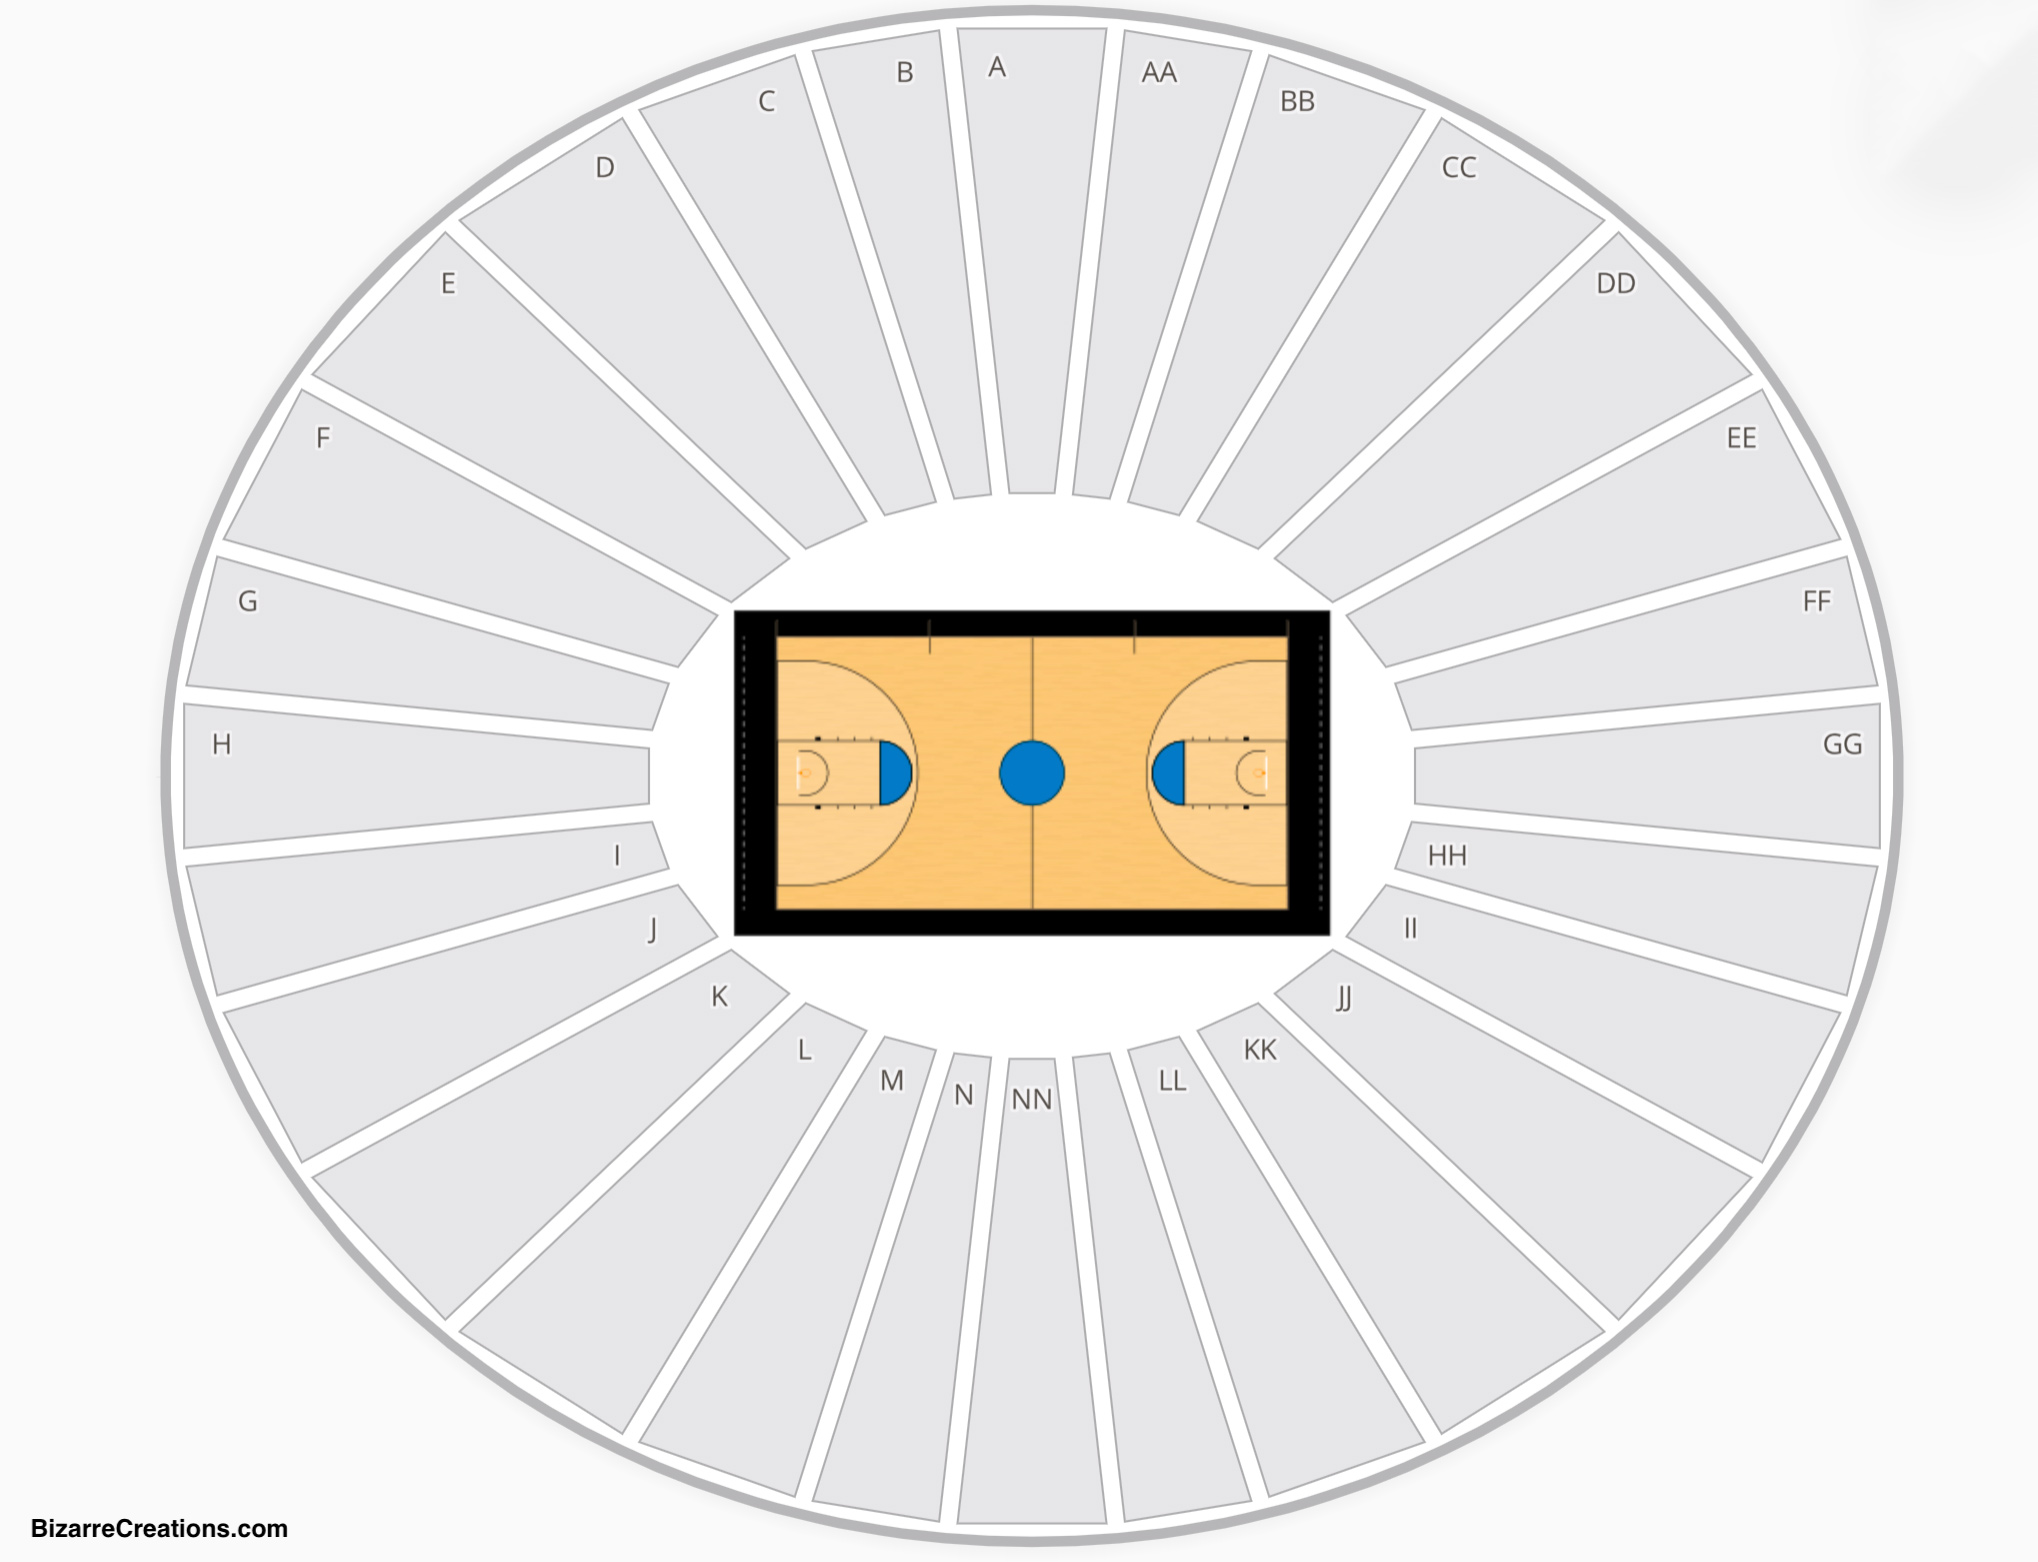 CarverHawkeye Arena Seating Chart Seating Charts & Tickets